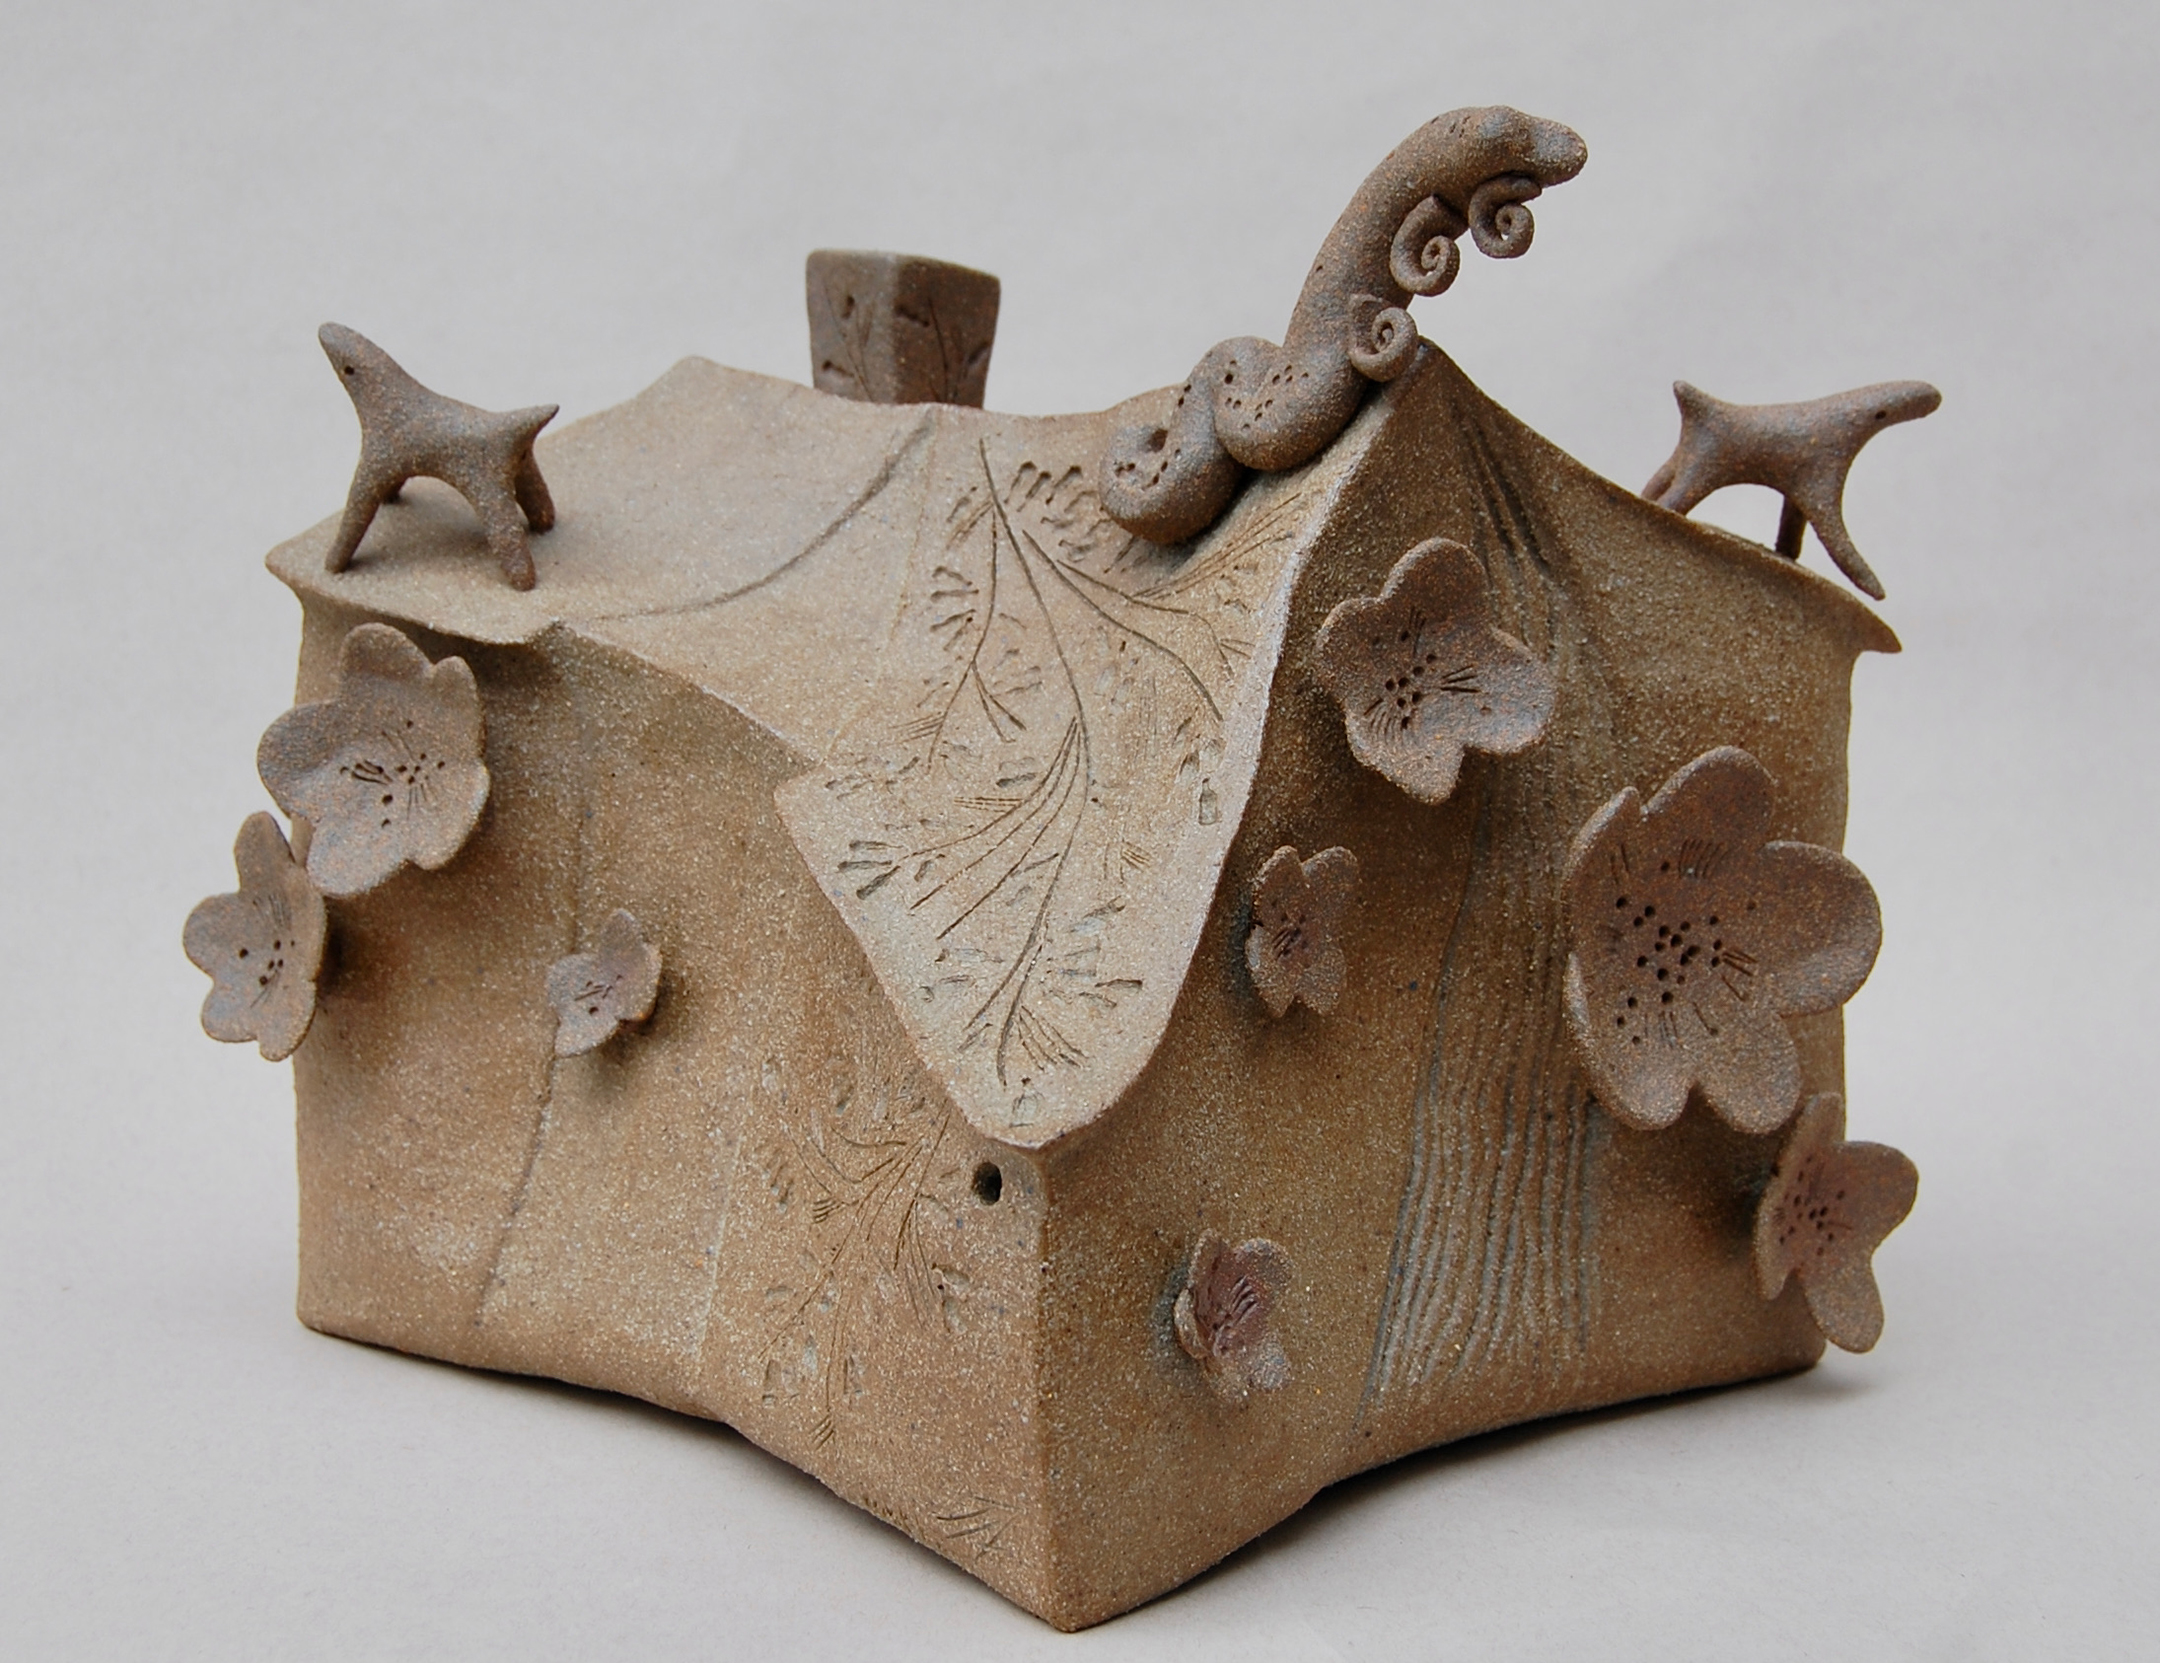 Sculpture of a house with flower and animal shapes attached in a sandy brown